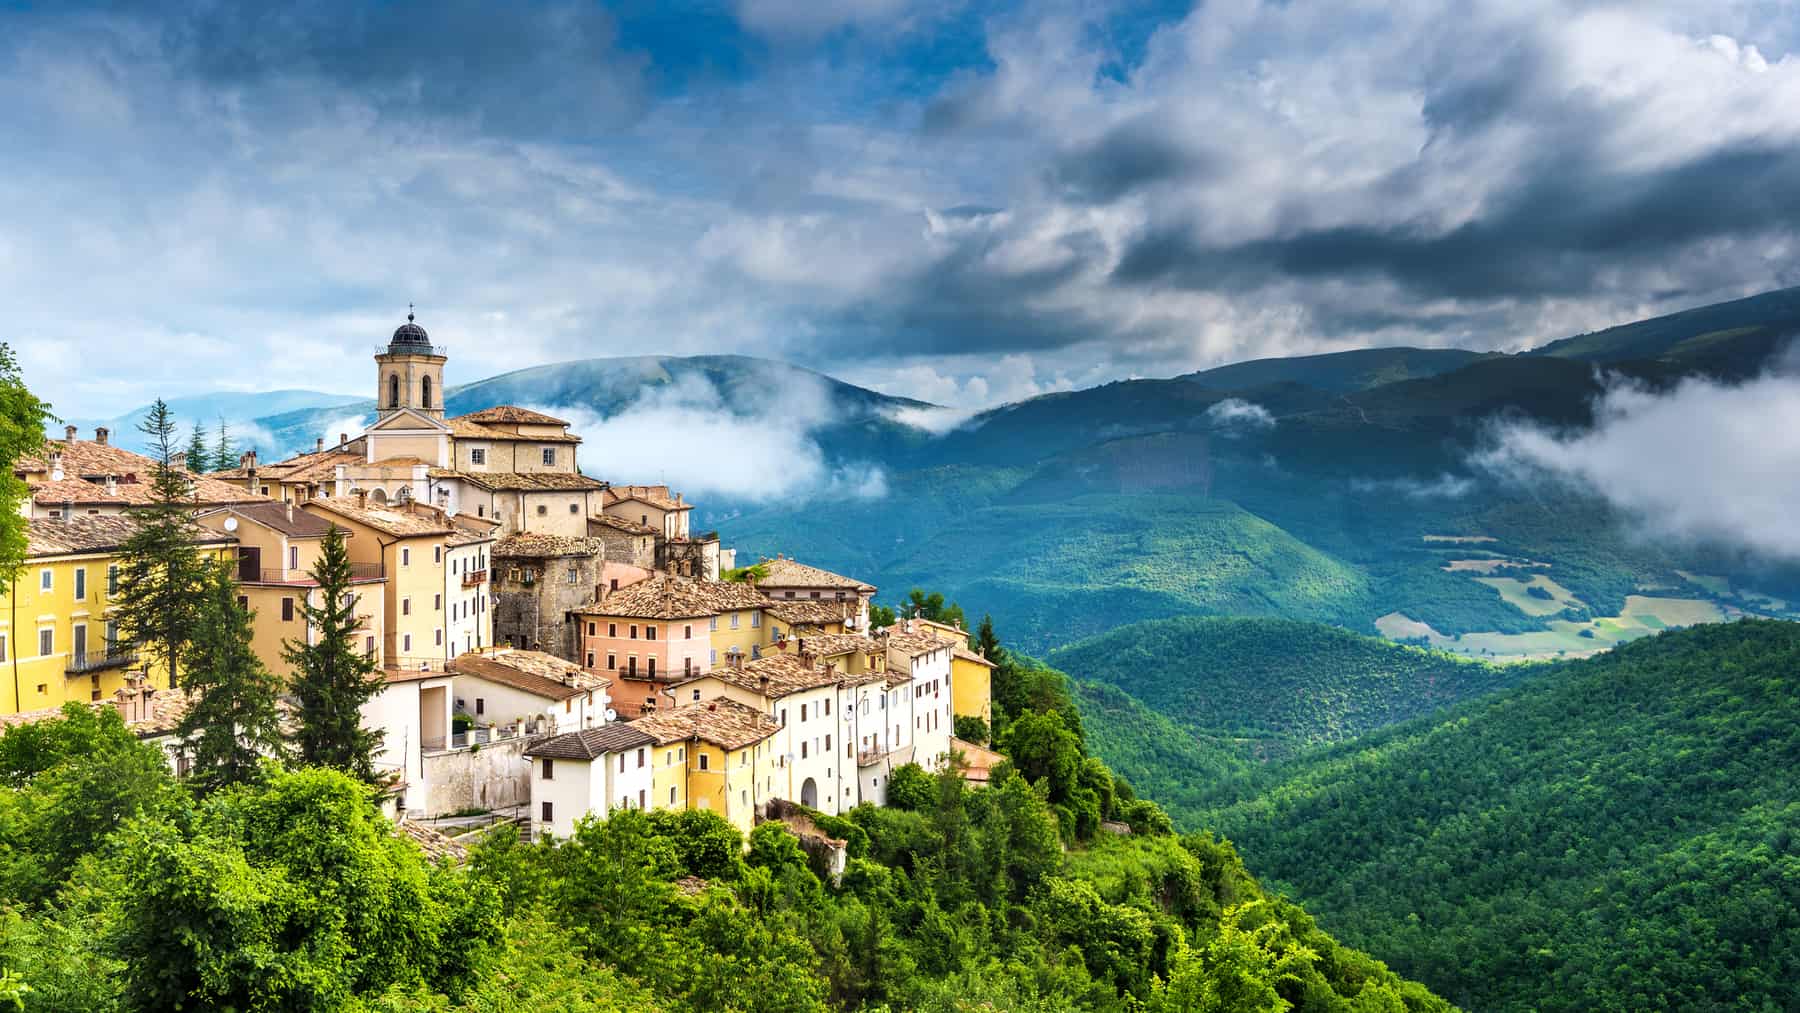 Abeto small town with beautiful views of the mountains and gorges in Umbria, Italy